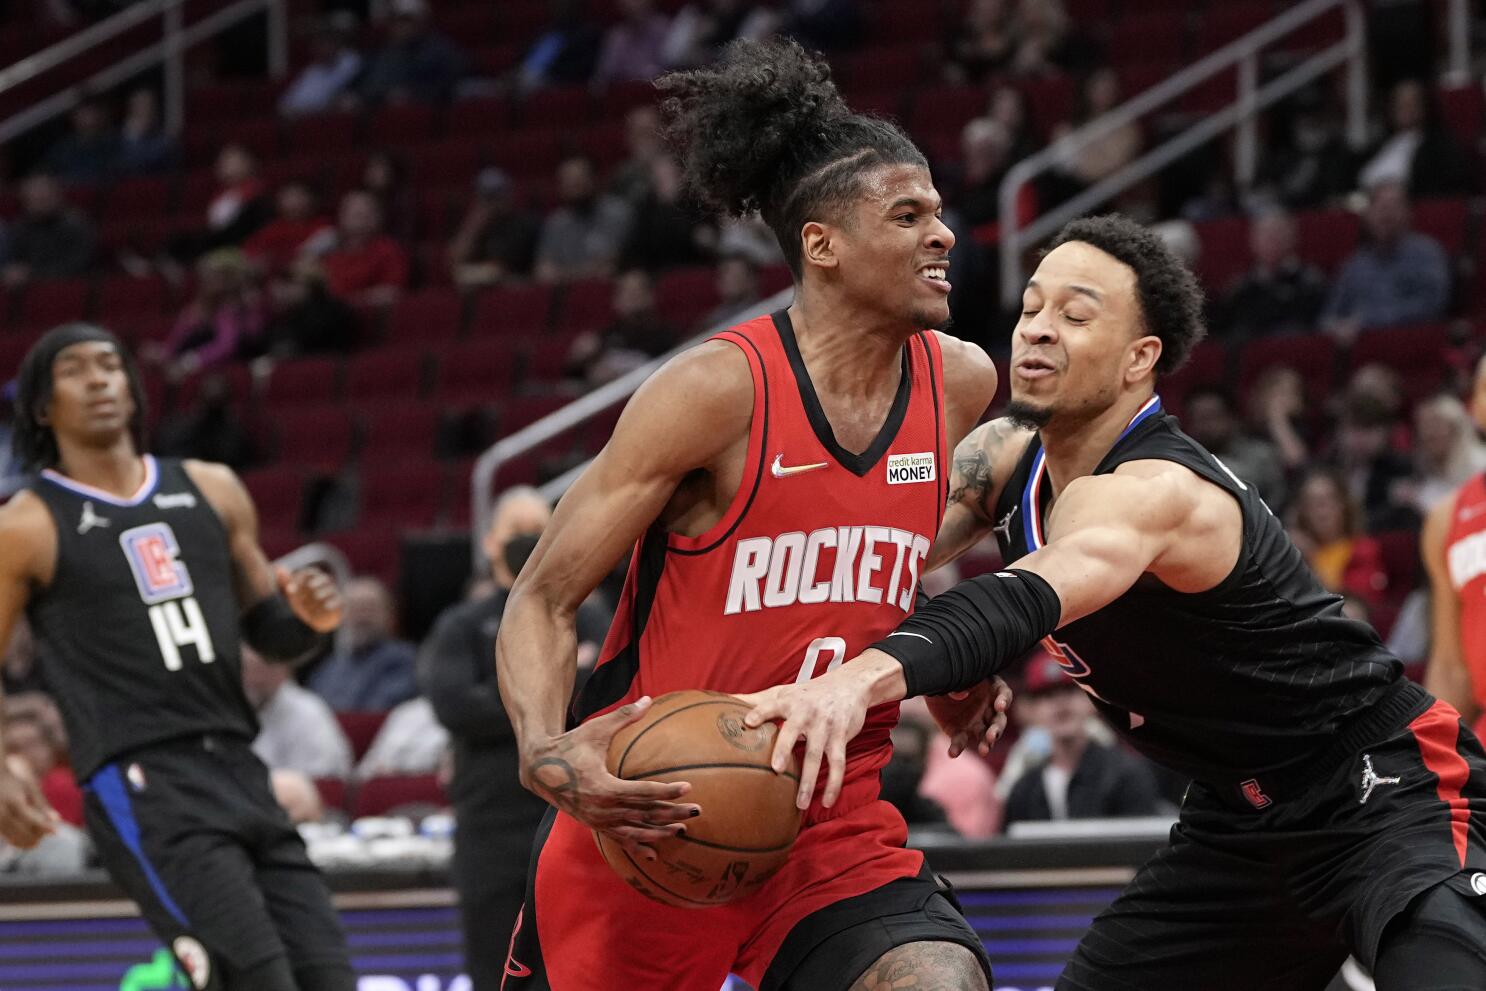 Houston Rockets cap 2022 with a blowout loss to New York Knicks